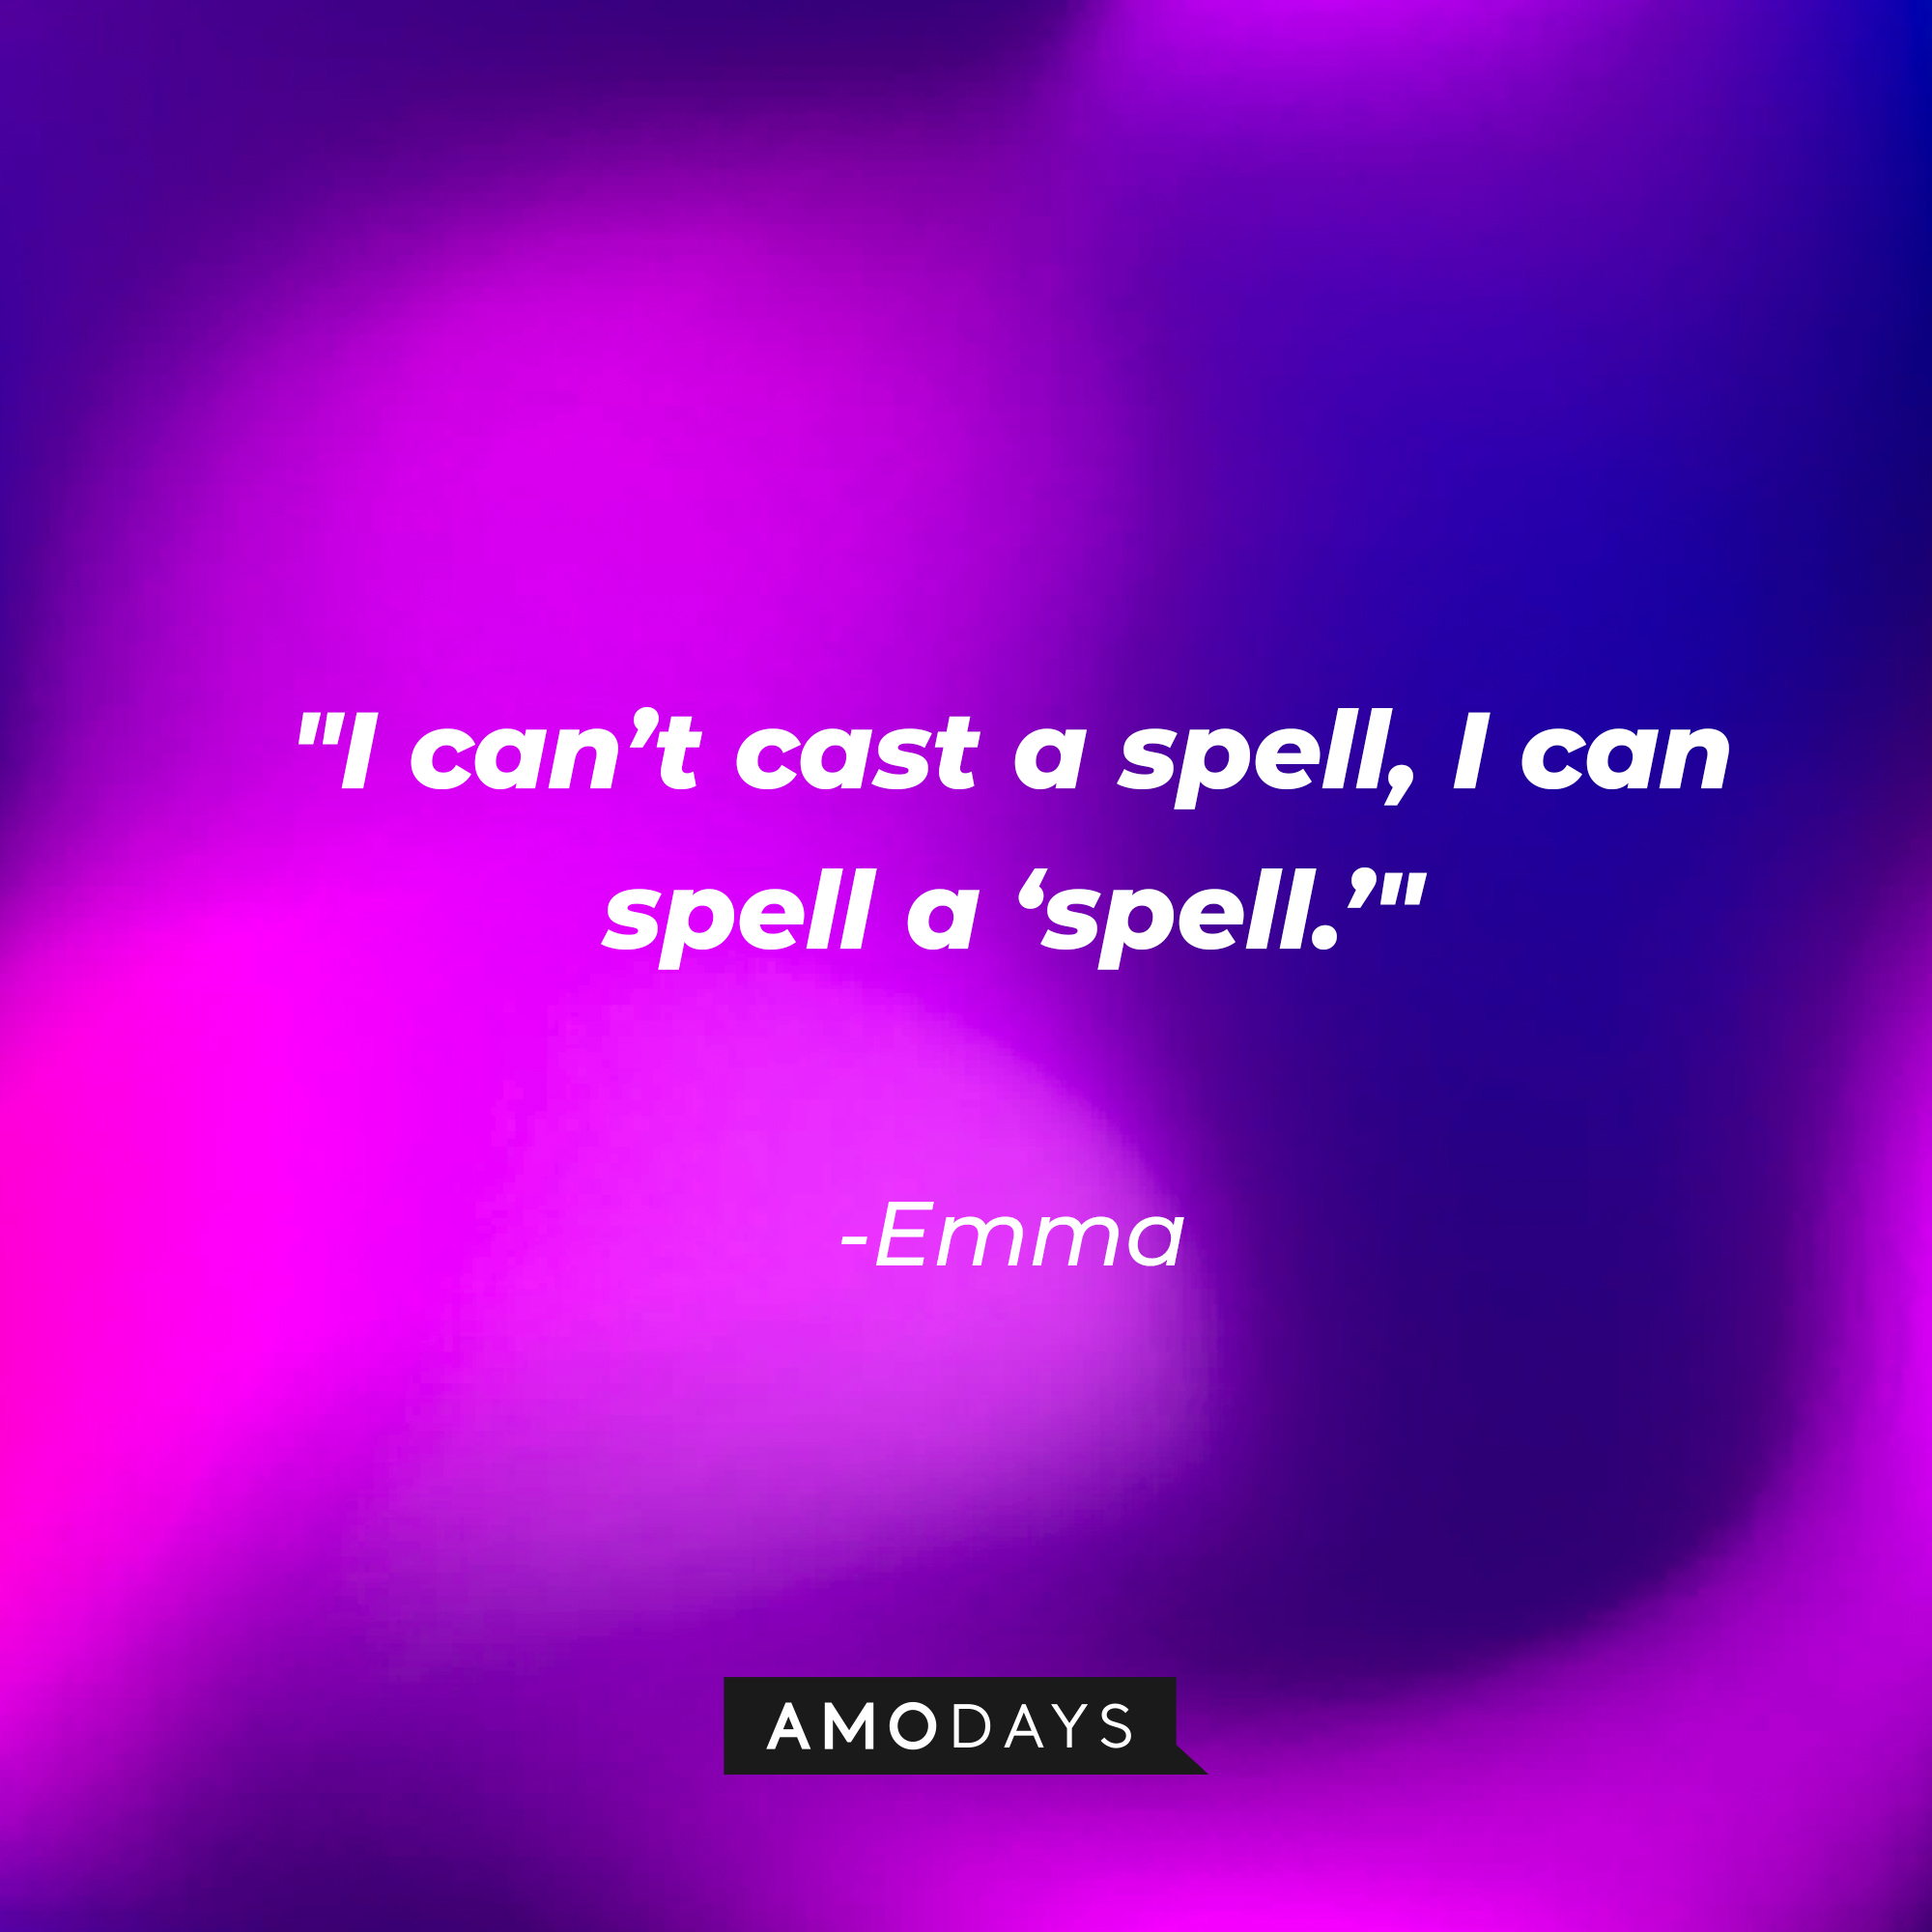 Emma's quote: "I can't cast a spell, I can spell a 'spell.'" | Source: Amodays